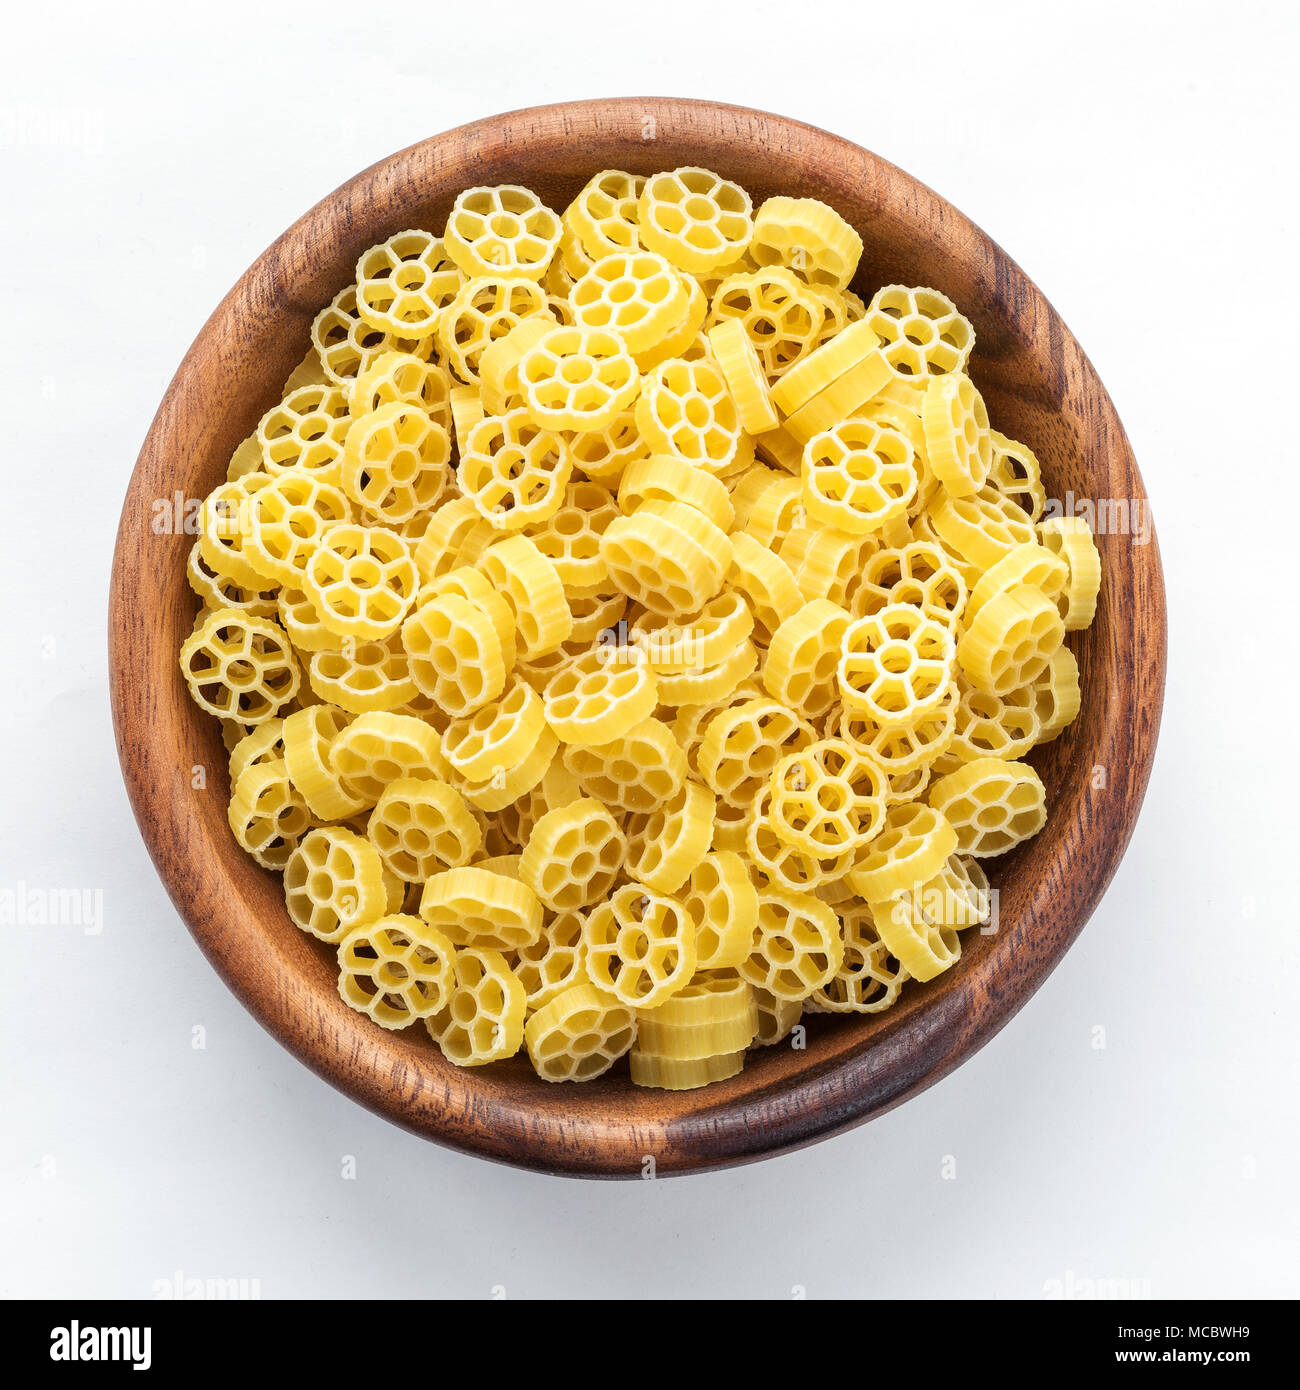 Macaroni ruote pasta in wooden bowl on white isolated background, in the center close-up with top. Stock Photo